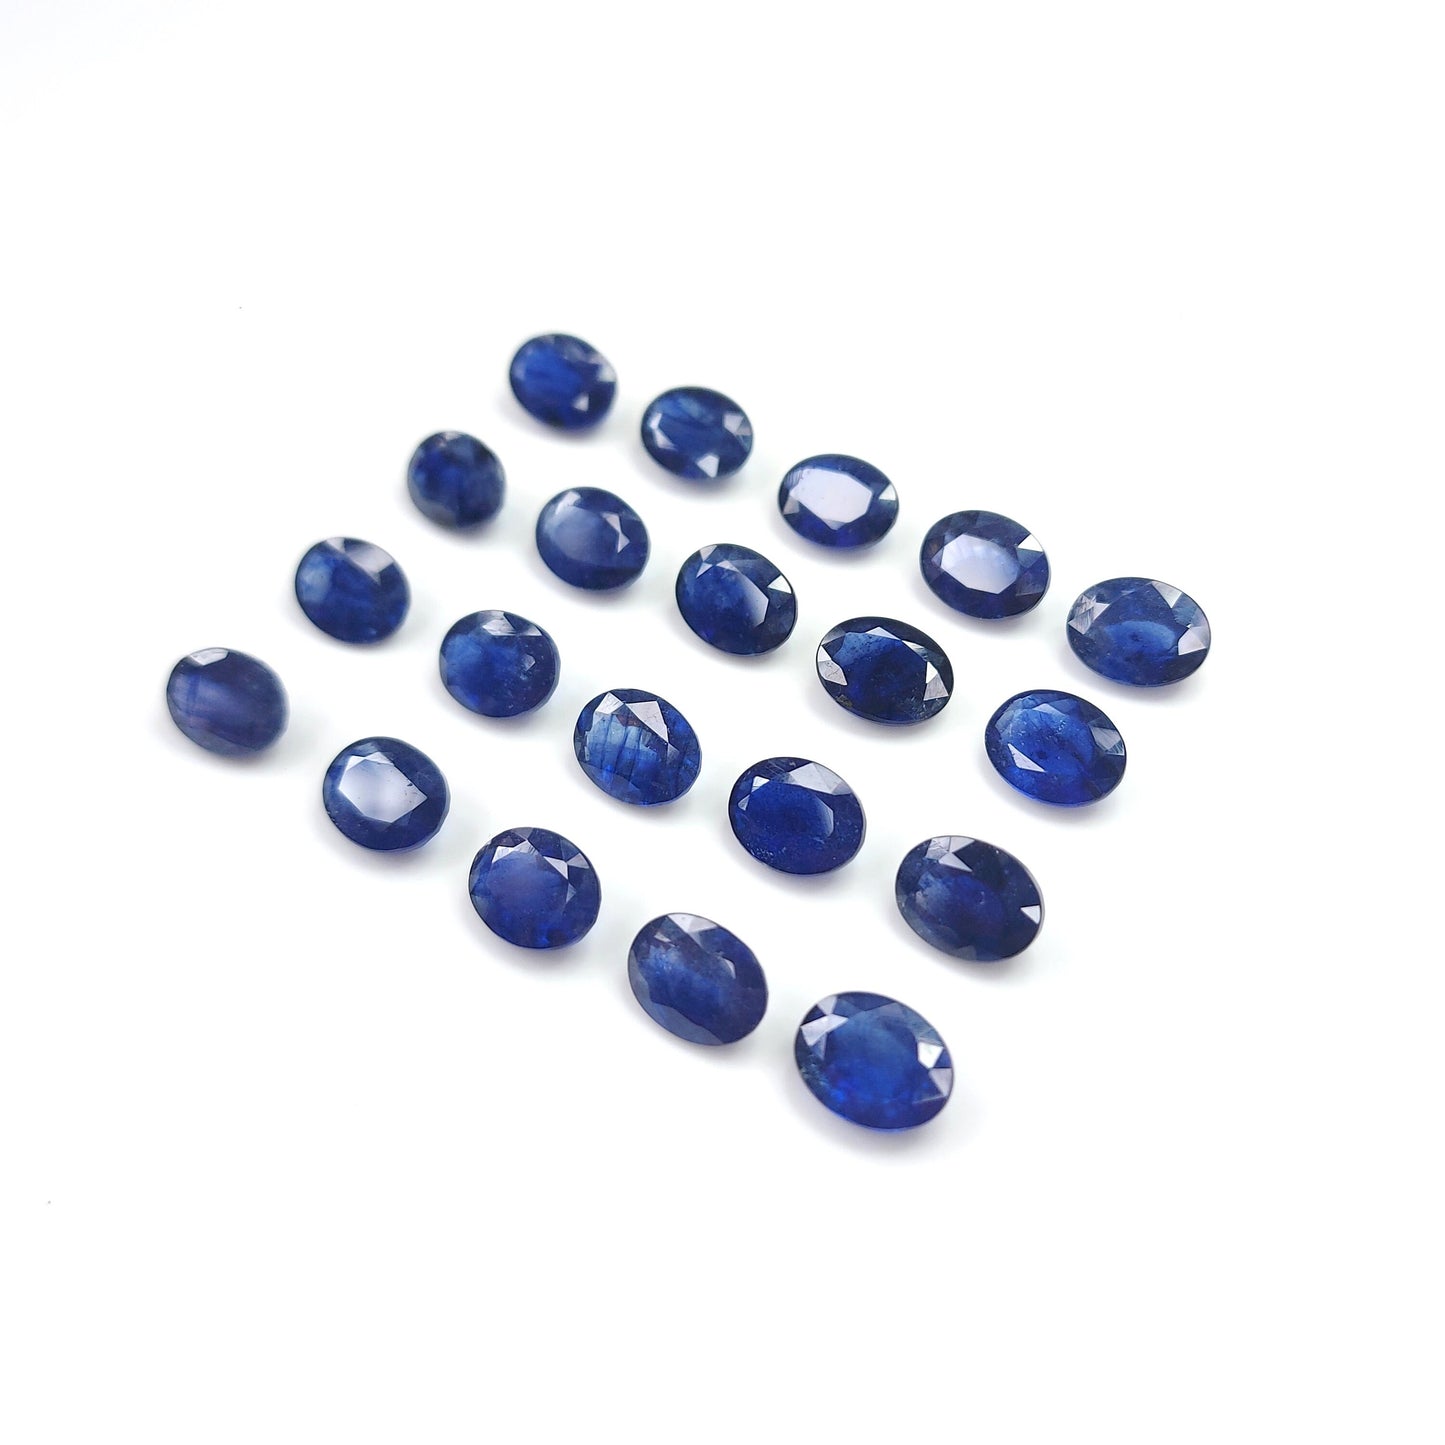 Natural Blue Sapphire Fissure Filled Calibrated Ovals